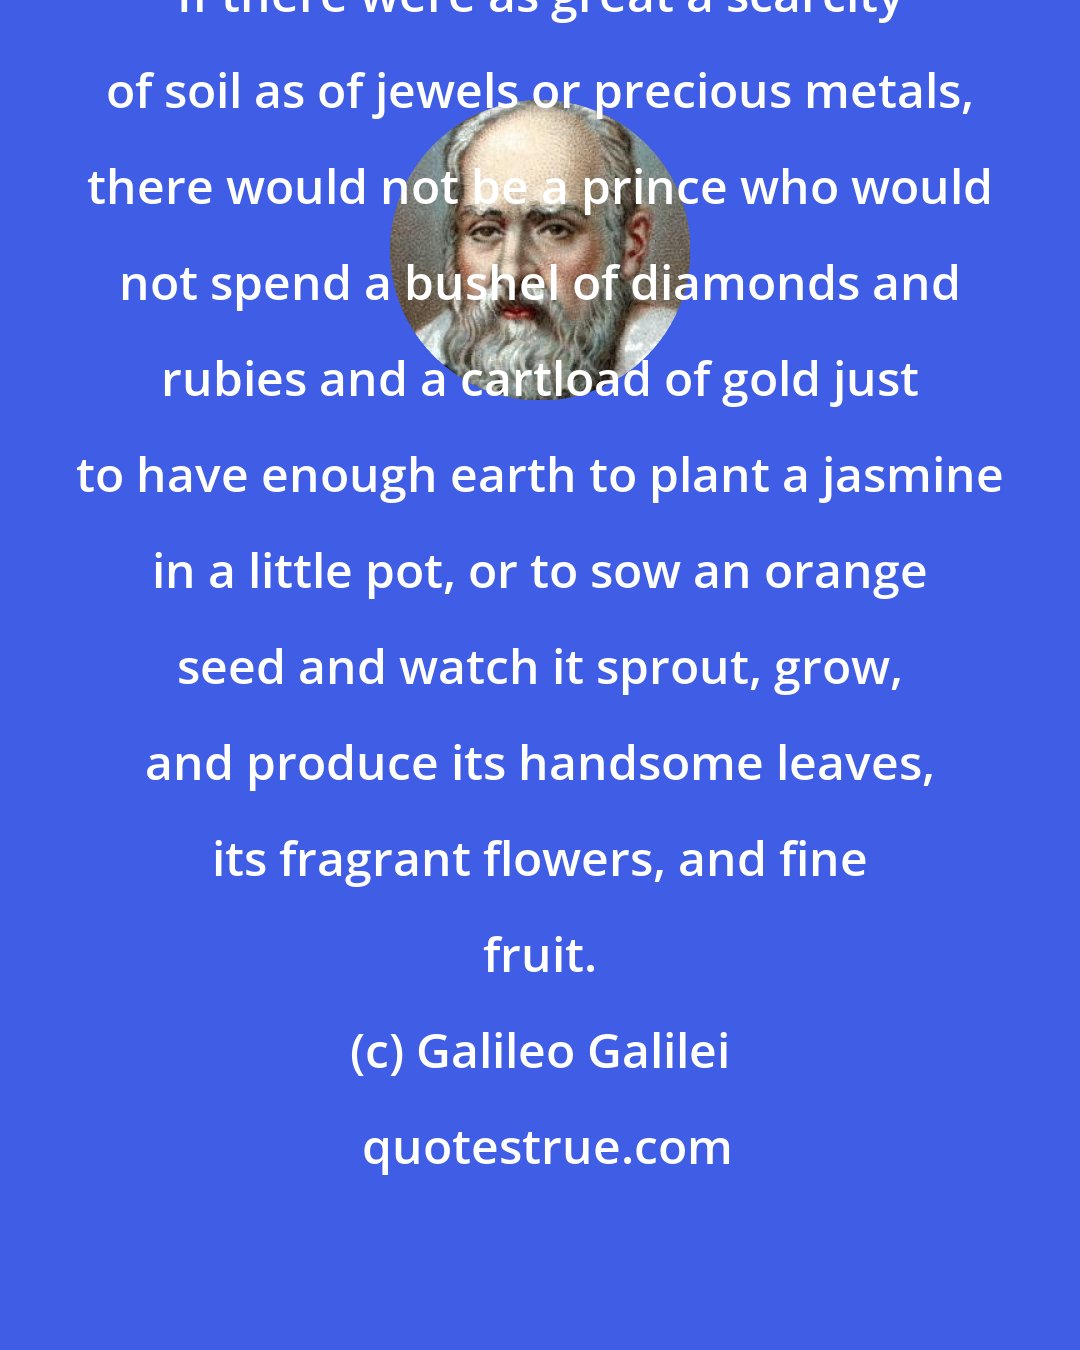 Galileo Galilei: If there were as great a scarcity of soil as of jewels or precious metals, there would not be a prince who would not spend a bushel of diamonds and rubies and a cartload of gold just to have enough earth to plant a jasmine in a little pot, or to sow an orange seed and watch it sprout, grow, and produce its handsome leaves, its fragrant flowers, and fine fruit.